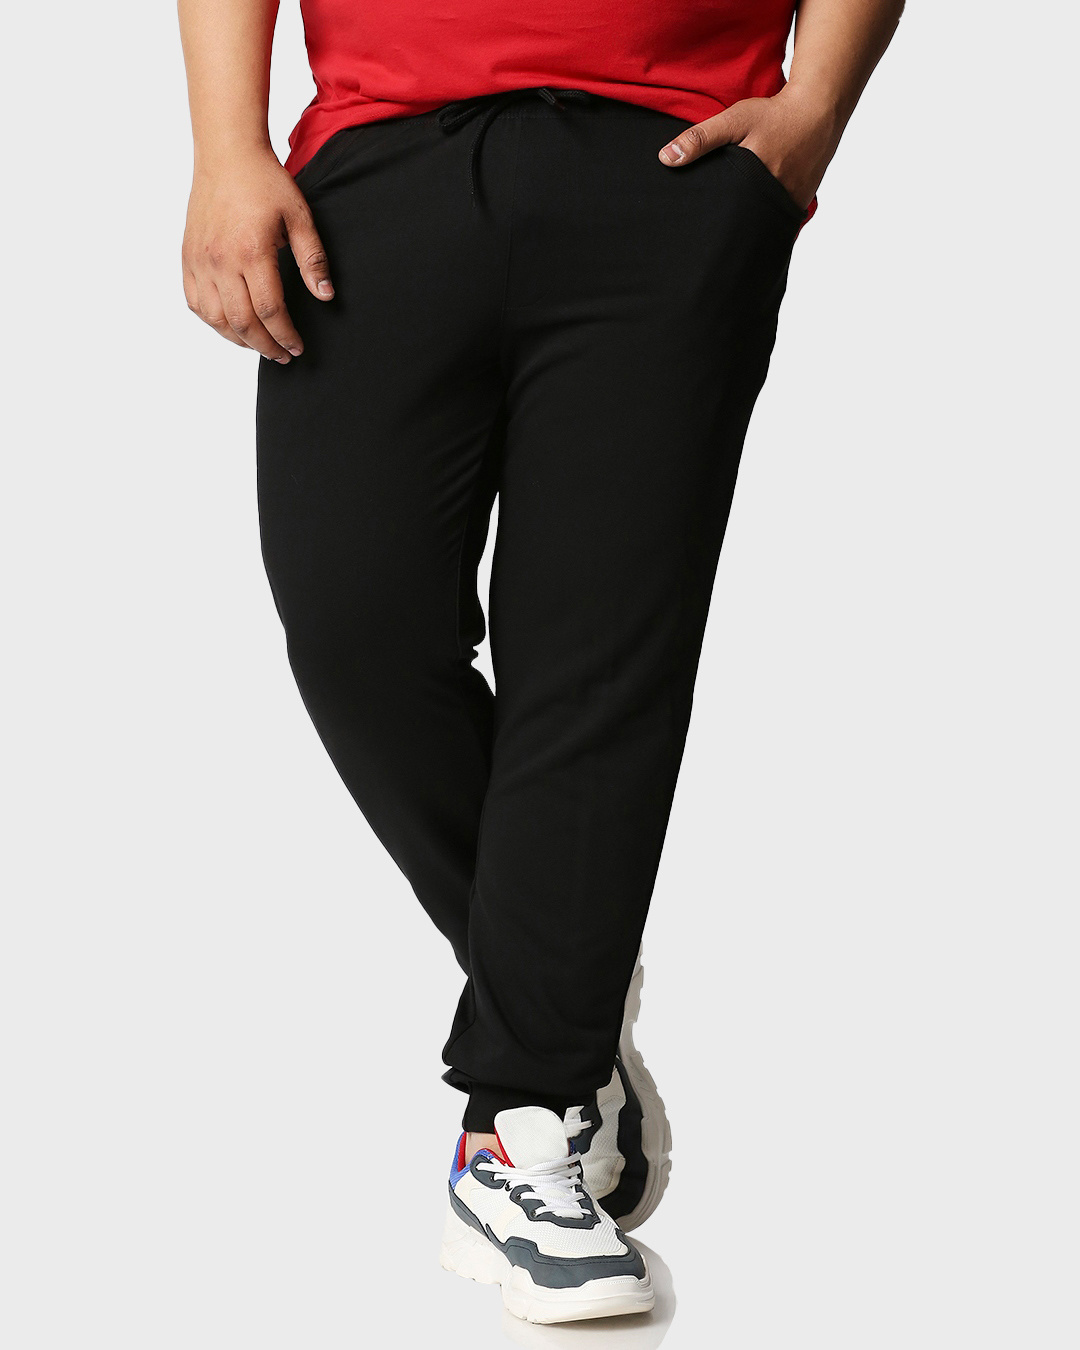 Buy Fizzique Men's Casual Jogger Pants Regular Fit | Cotton Spandex Stretch  Fabric | Adjustable Waistband | Zipper Pockets and Front Fly | Front Button  Enclosure (30, Black) at Amazon.in